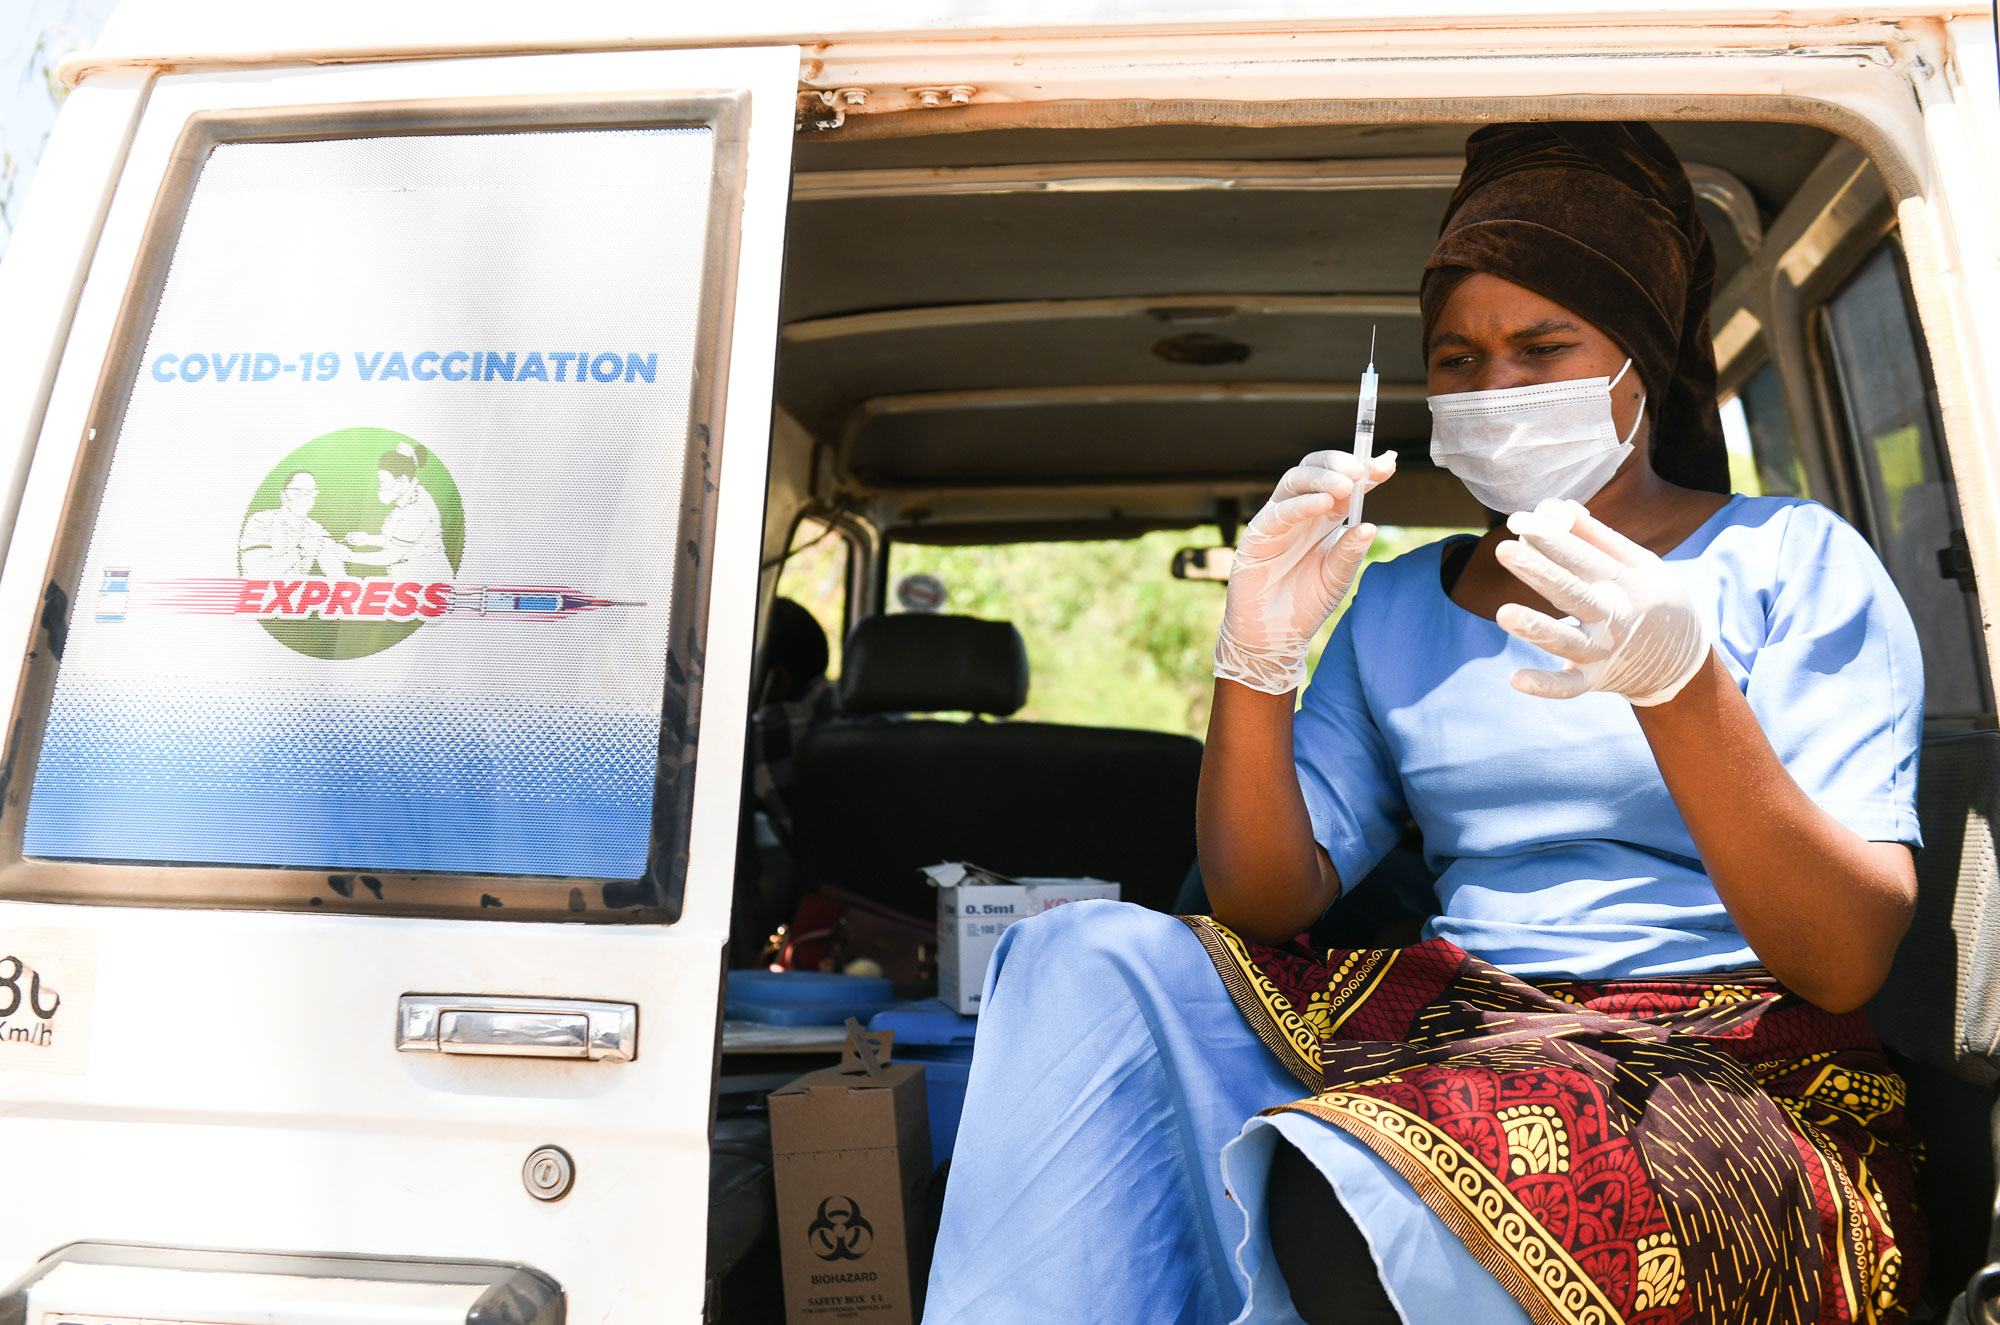 A health worker prepares to administer COVID-19 vaccines at a village in Kasungu, Malawi.